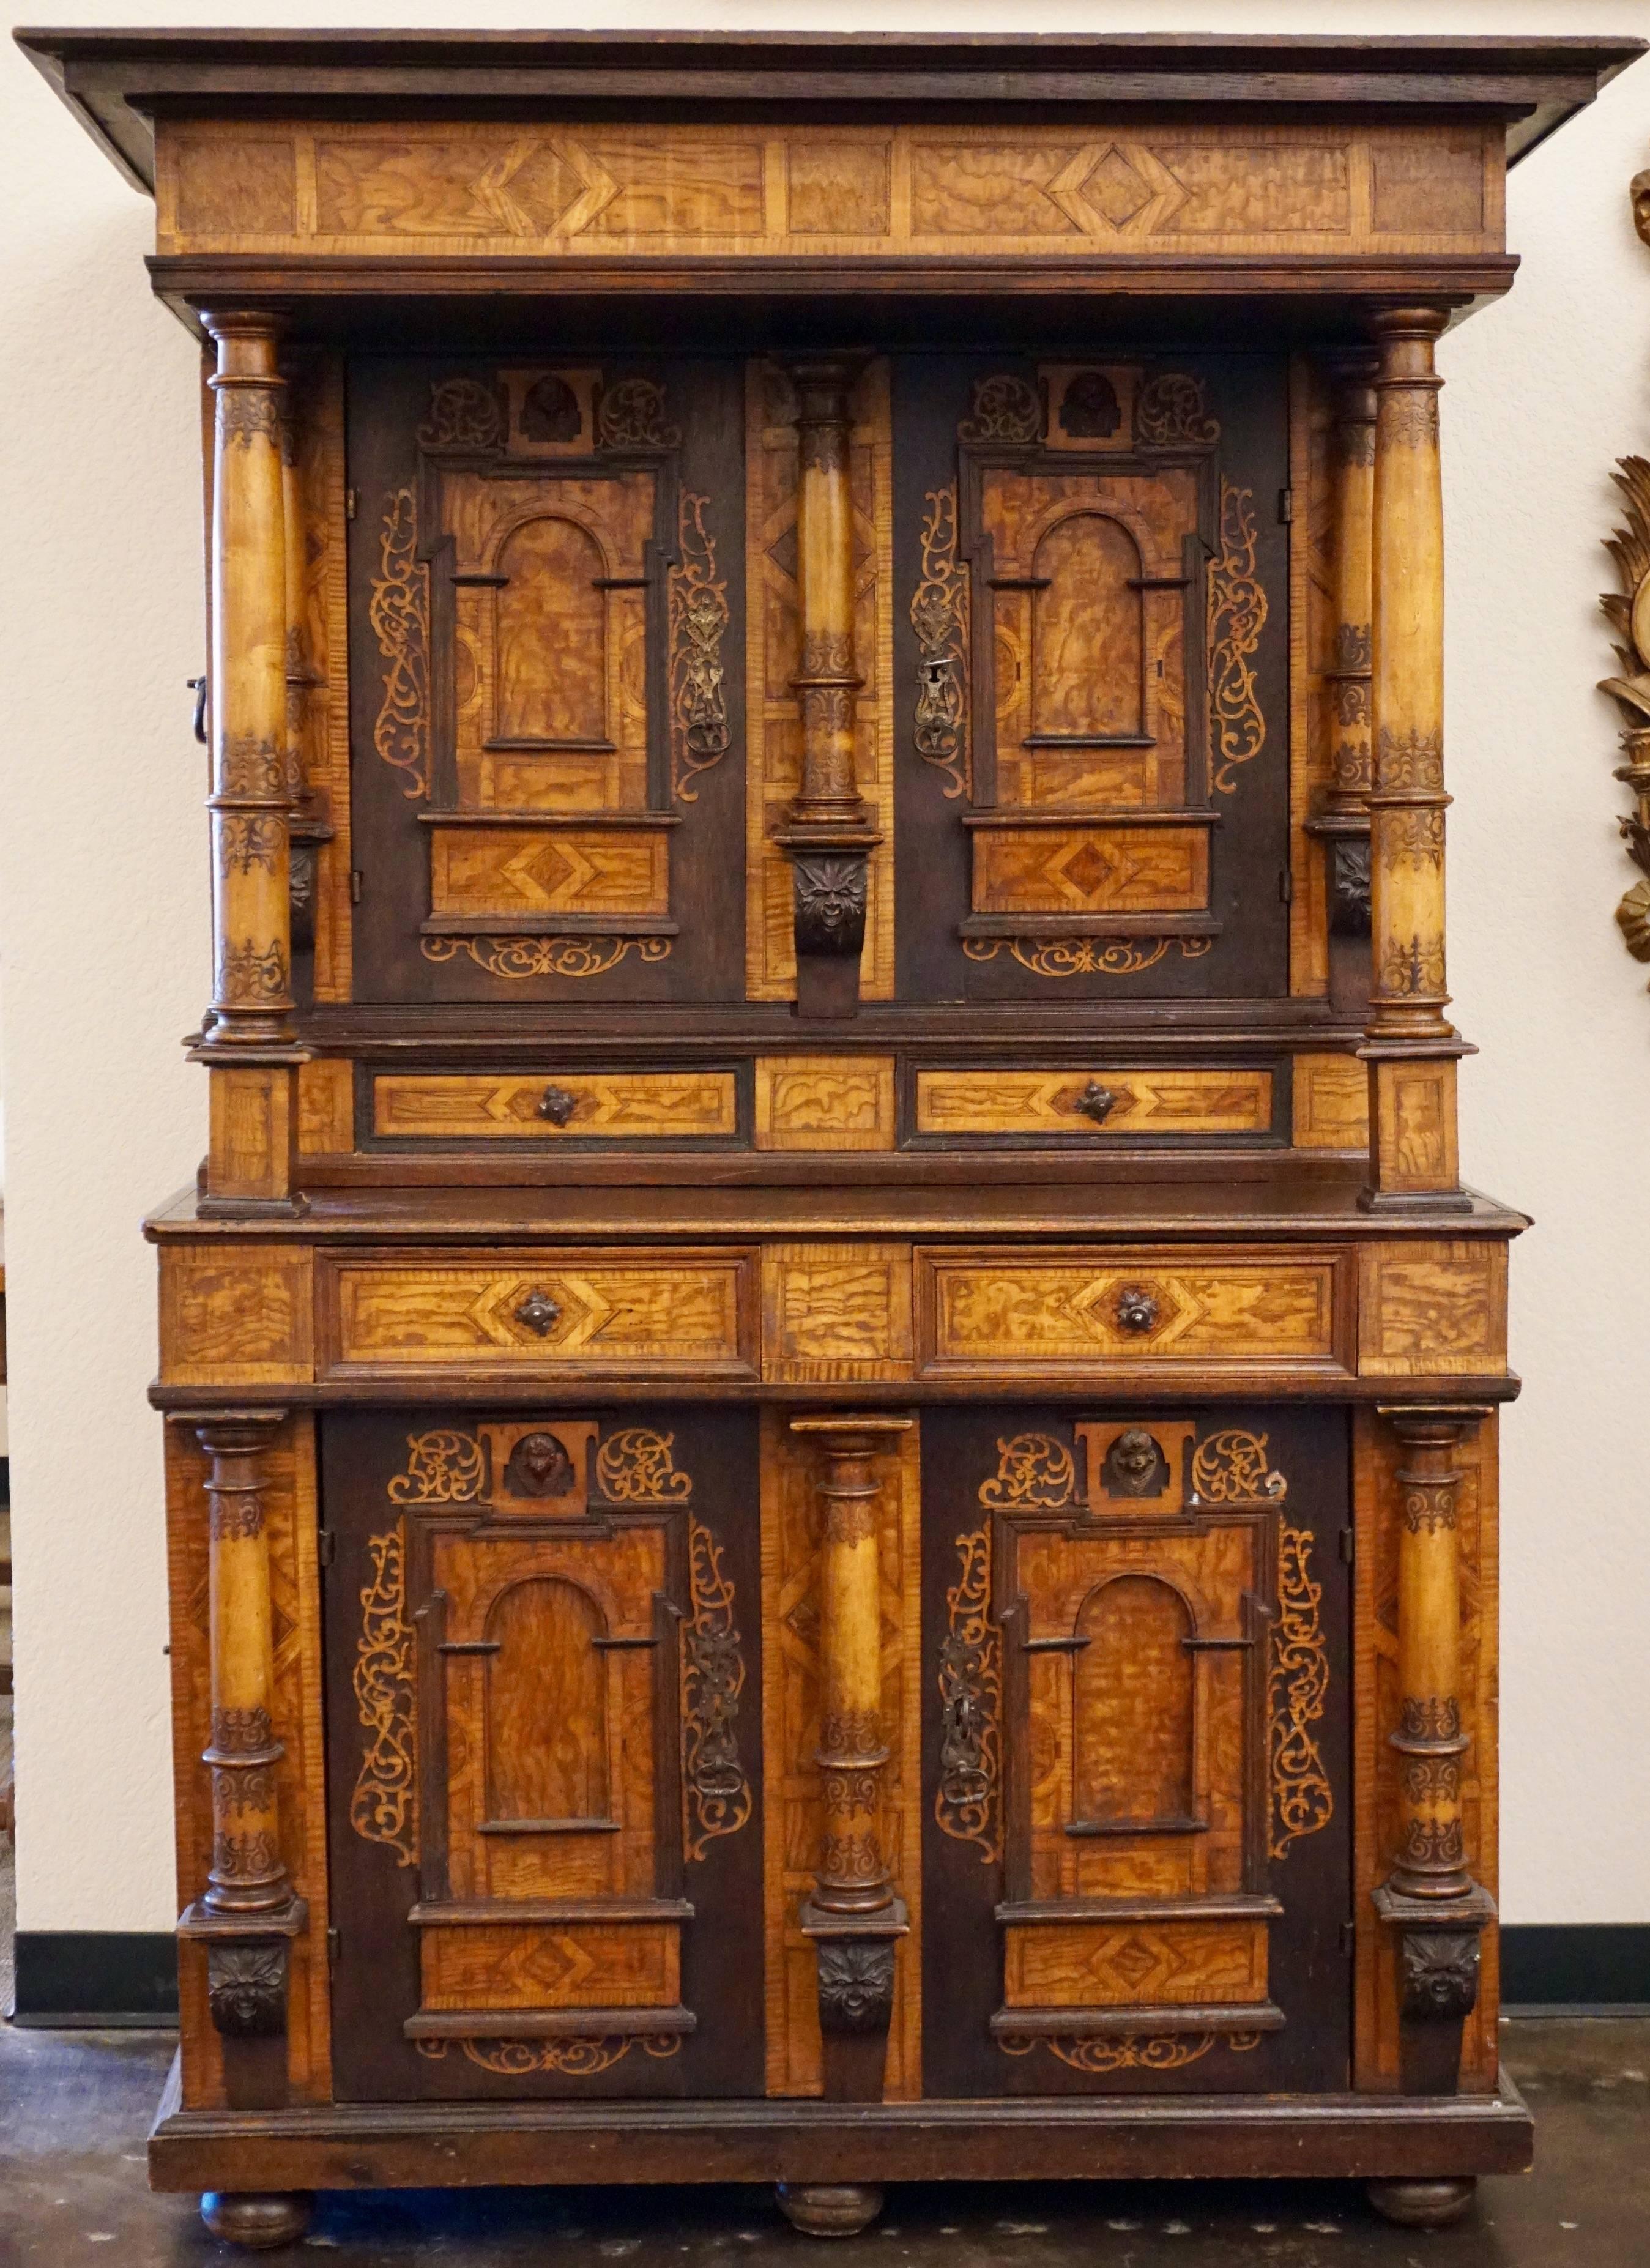 Rare 18th-19th century Alsacienne inlaid cabinet, the stepped inlaid cornice on columnar supports over two doors with architectural panels surmounted by putti masks above similar two-door base, upper and lower sections revealing shelved interiors,